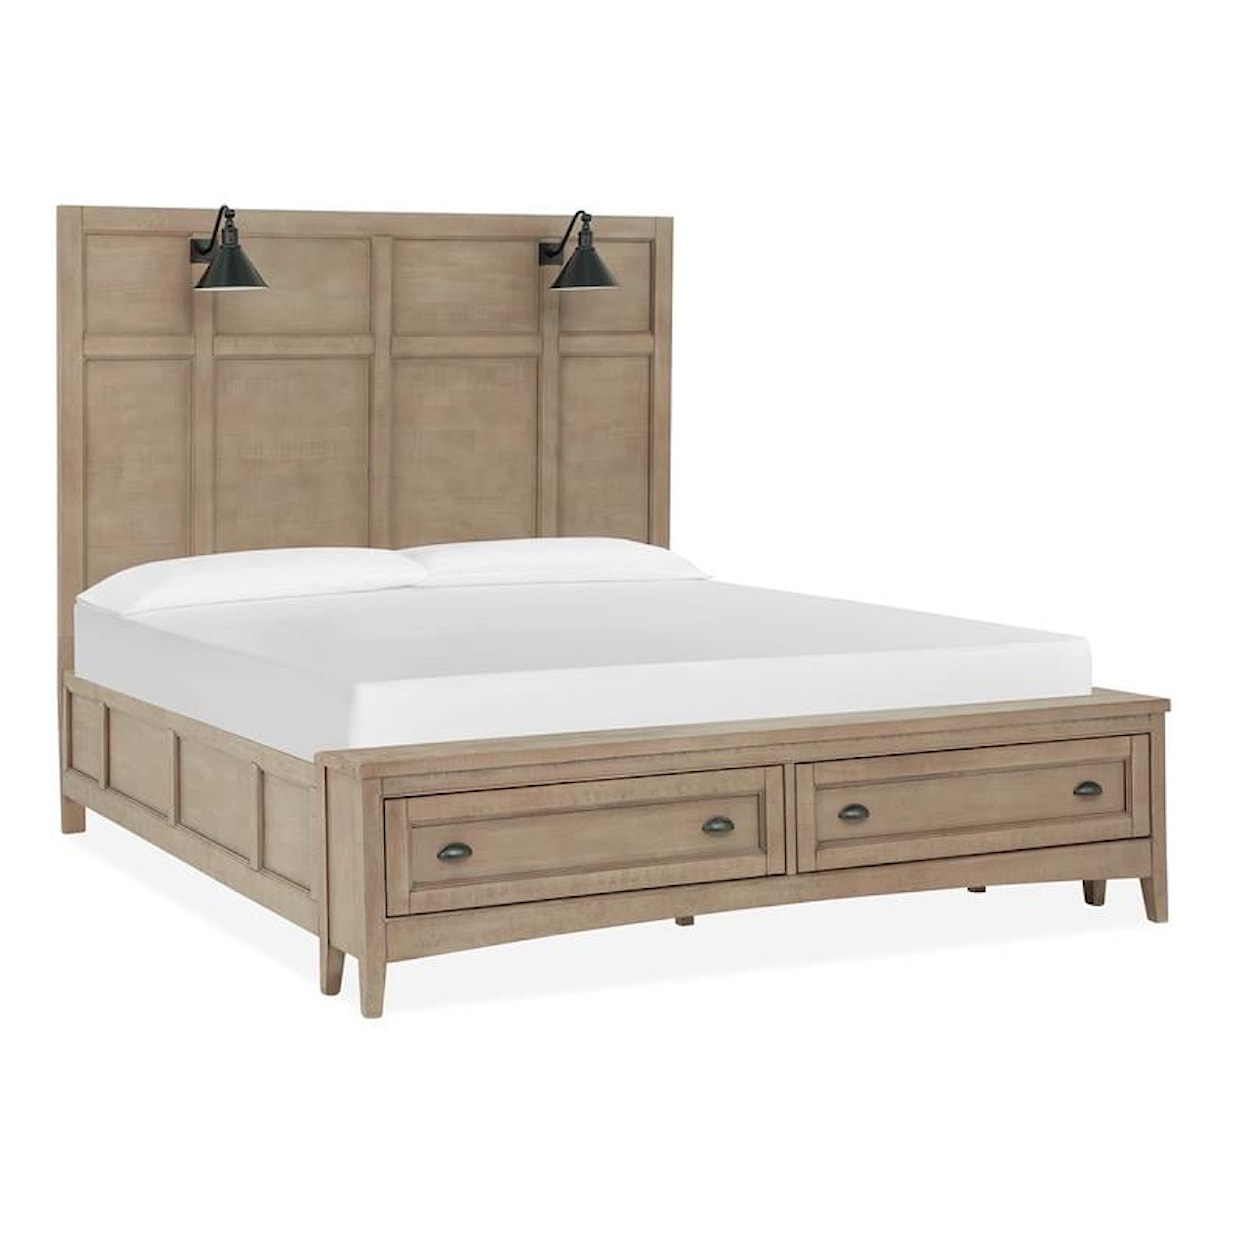 Magnussen Home Paxton Place Bedroom California King Lamp Panel Storage Bed